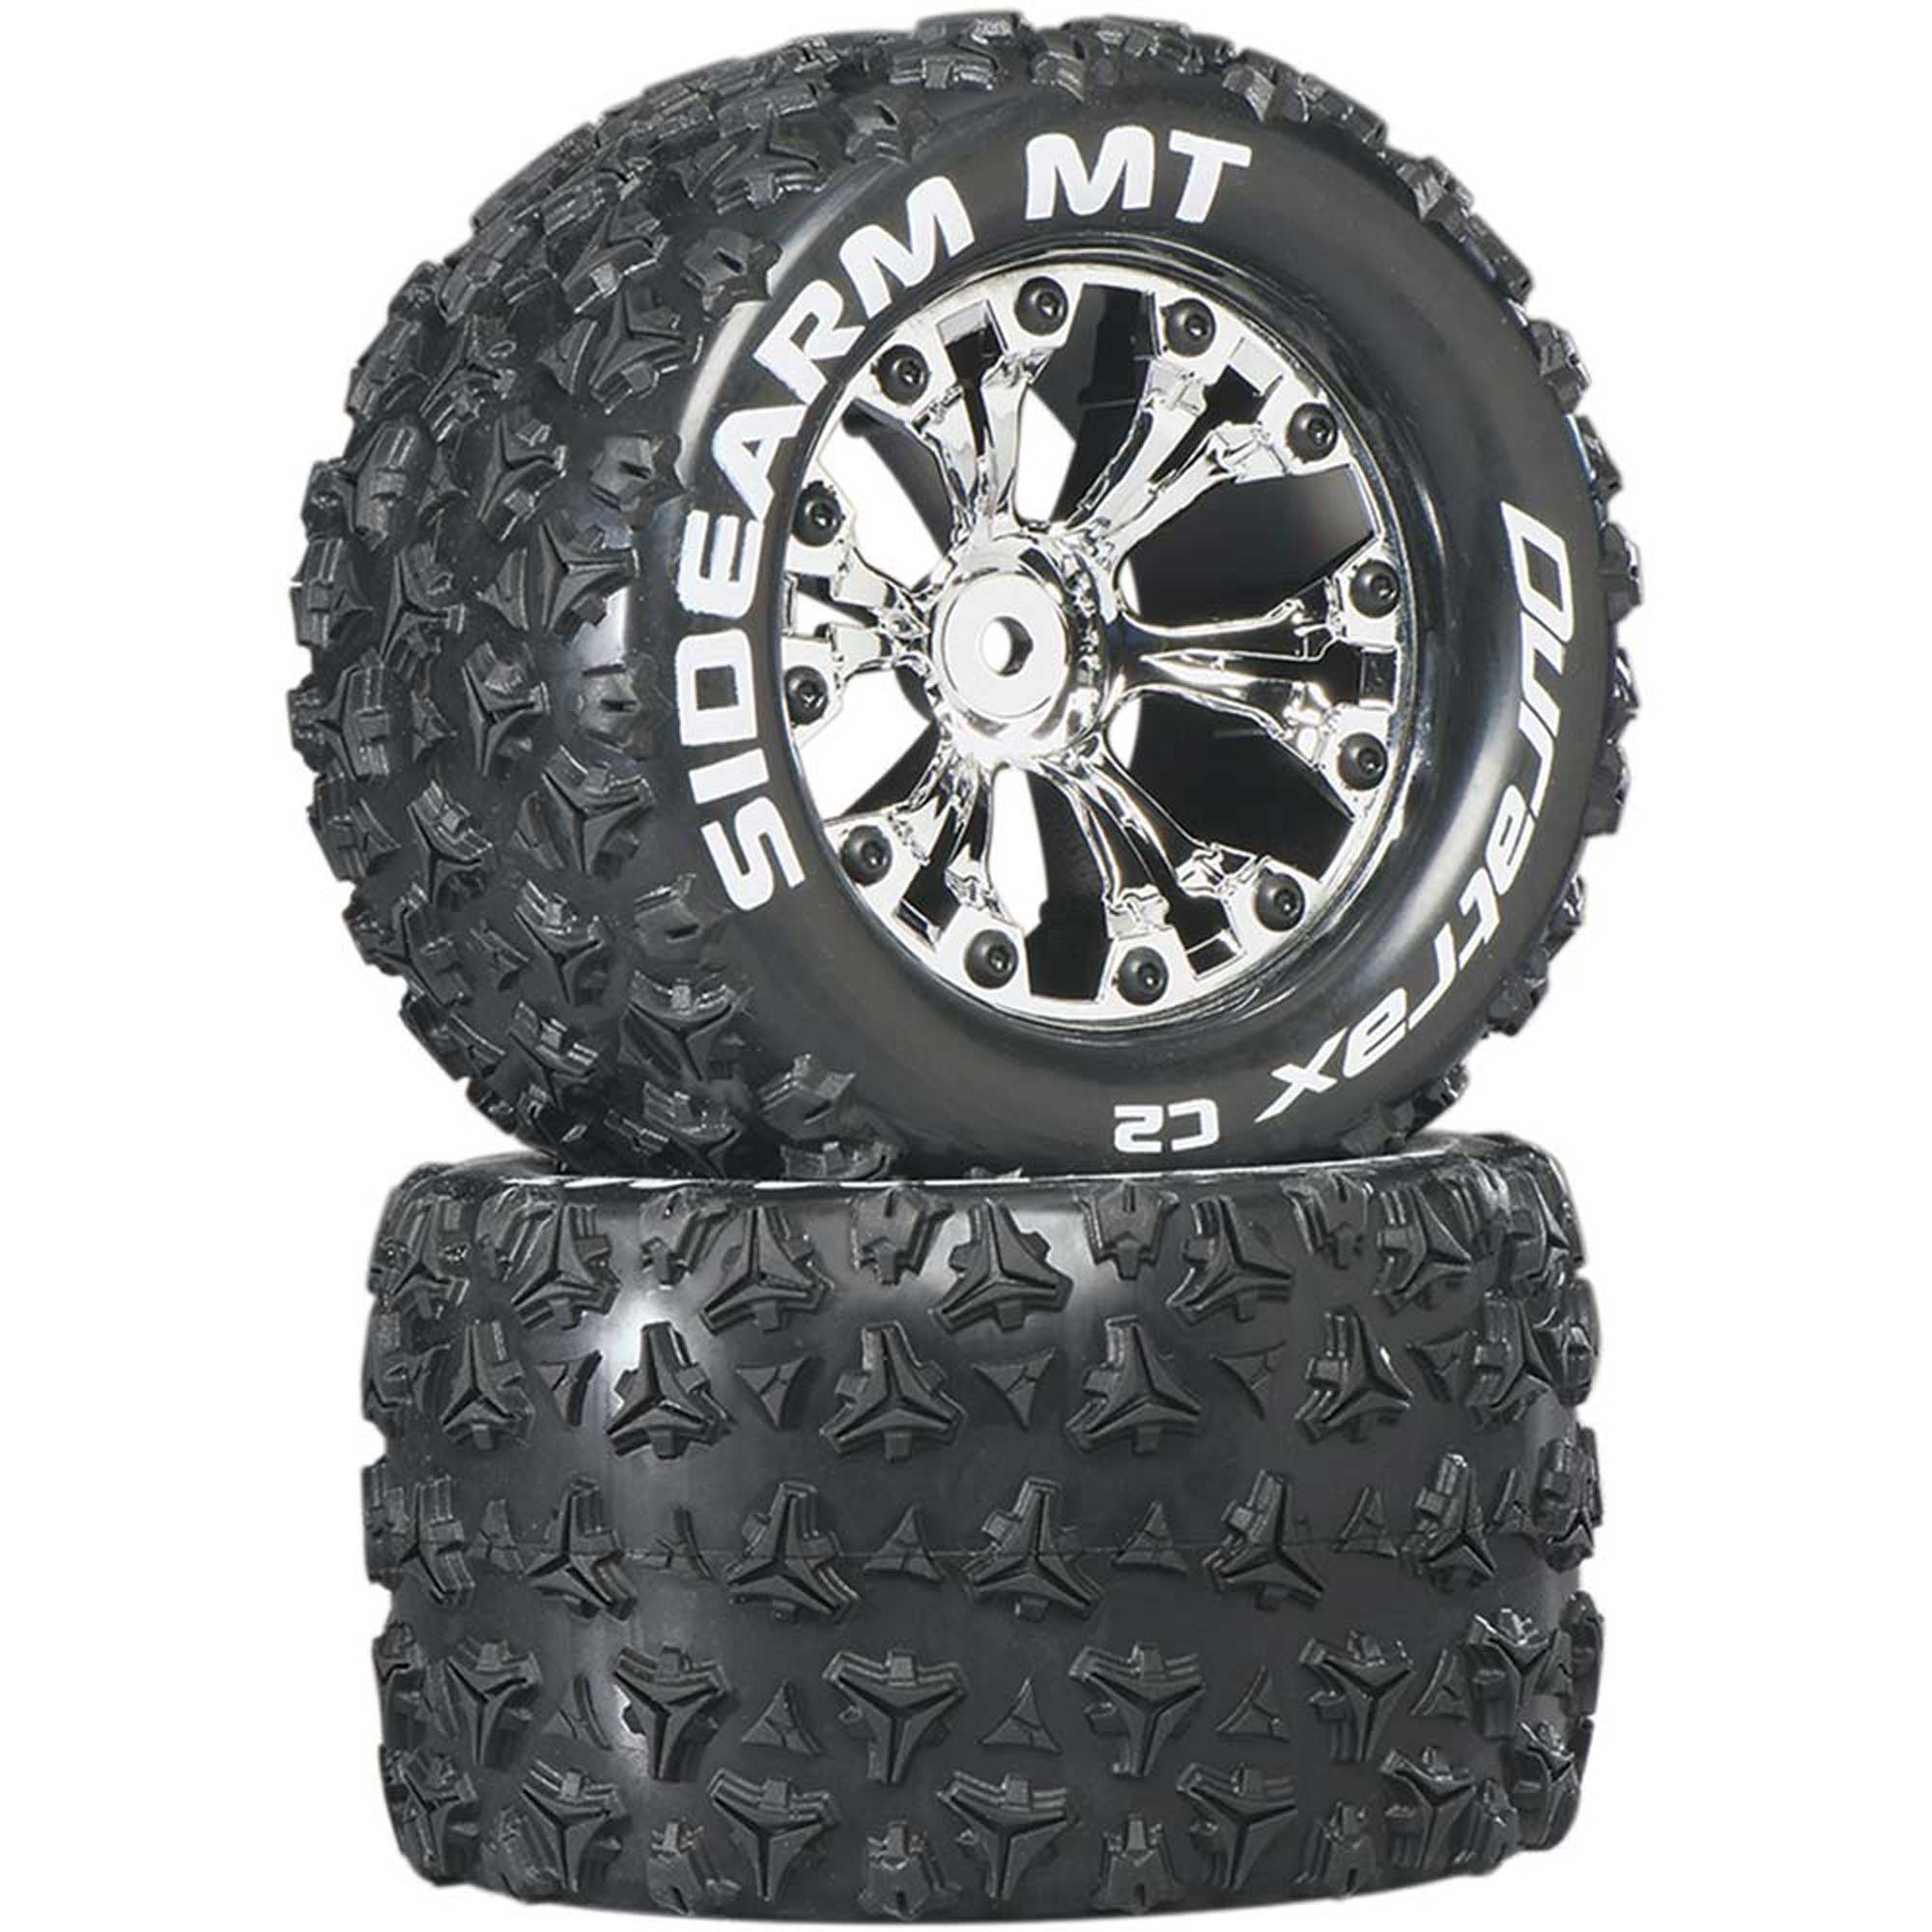 DTXC5251 Duratrax Bandito MT 2.8 Mounted Tires Chrome 14mm Hex 2 